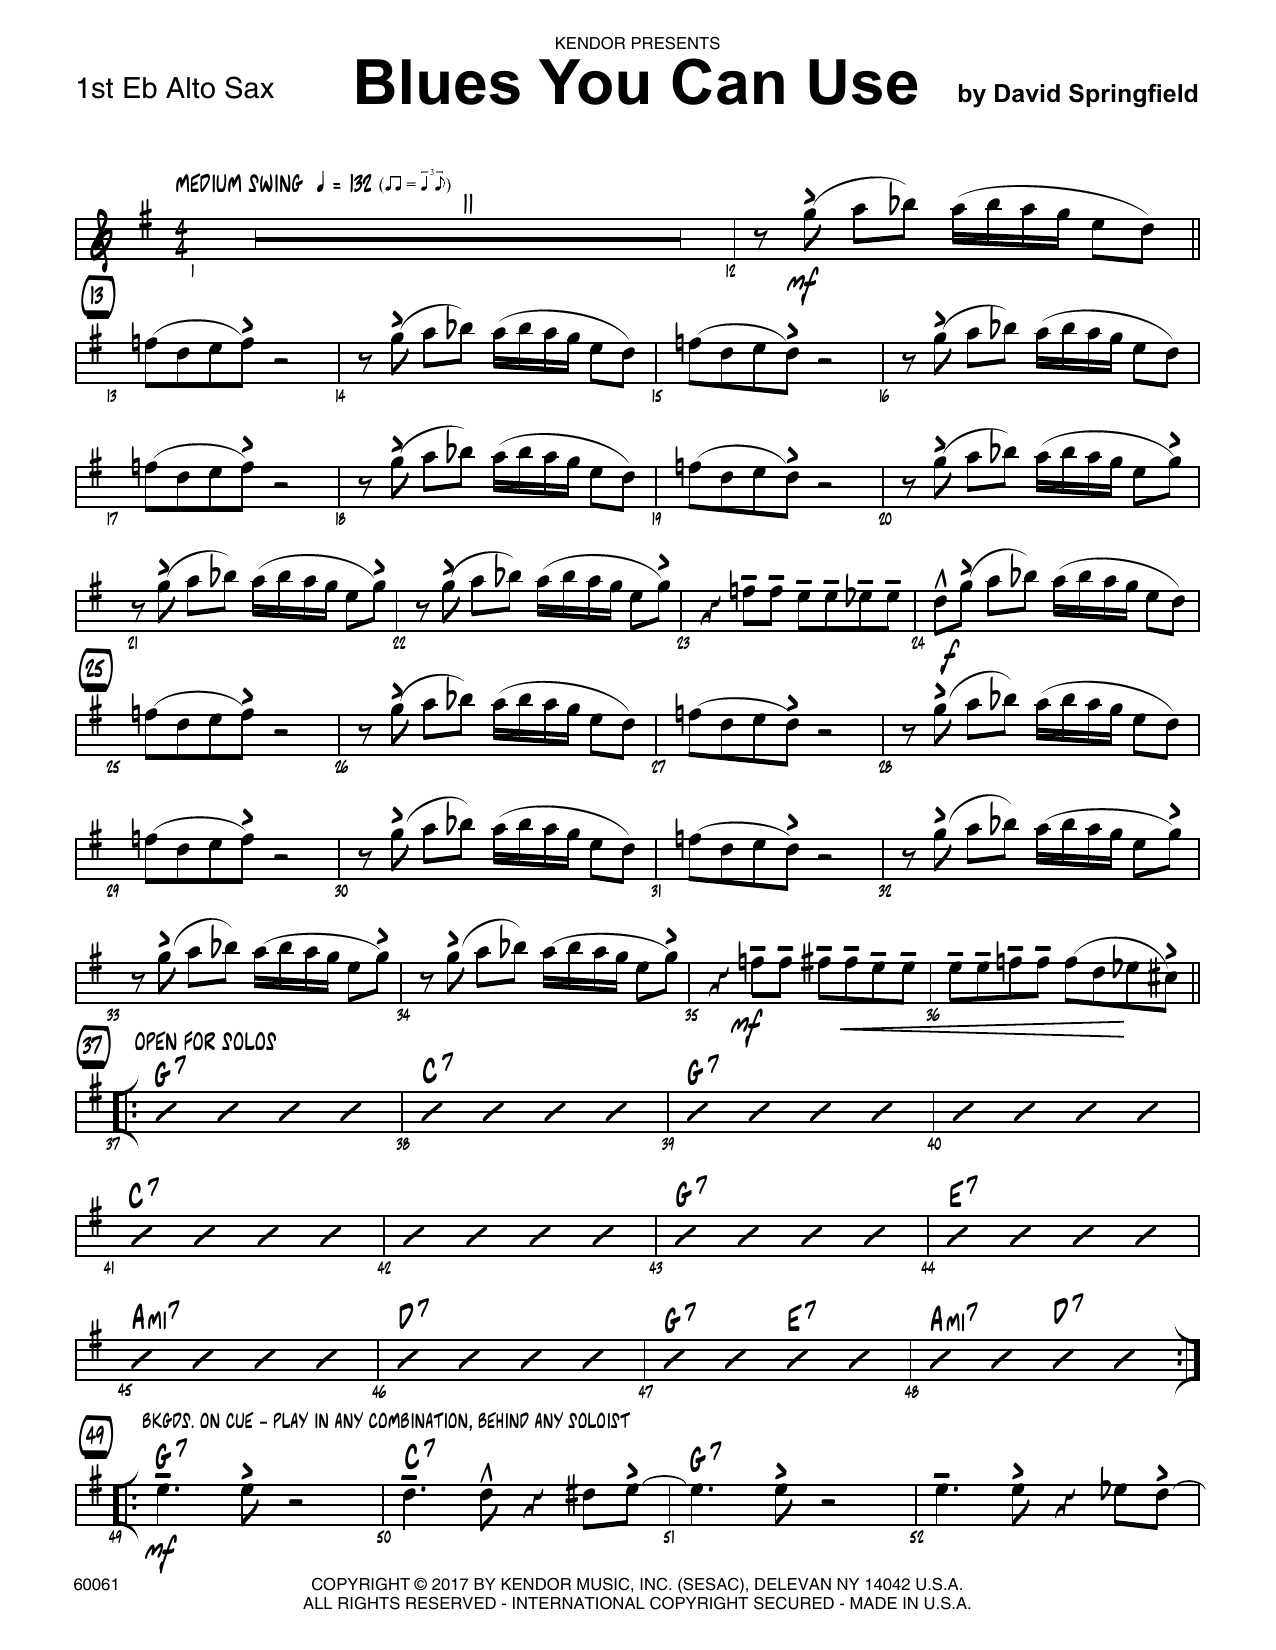 Download David Springfield Blues You Can Use - 1st Eb Alto Saxophone sheet music and printable PDF score & Jazz music notes